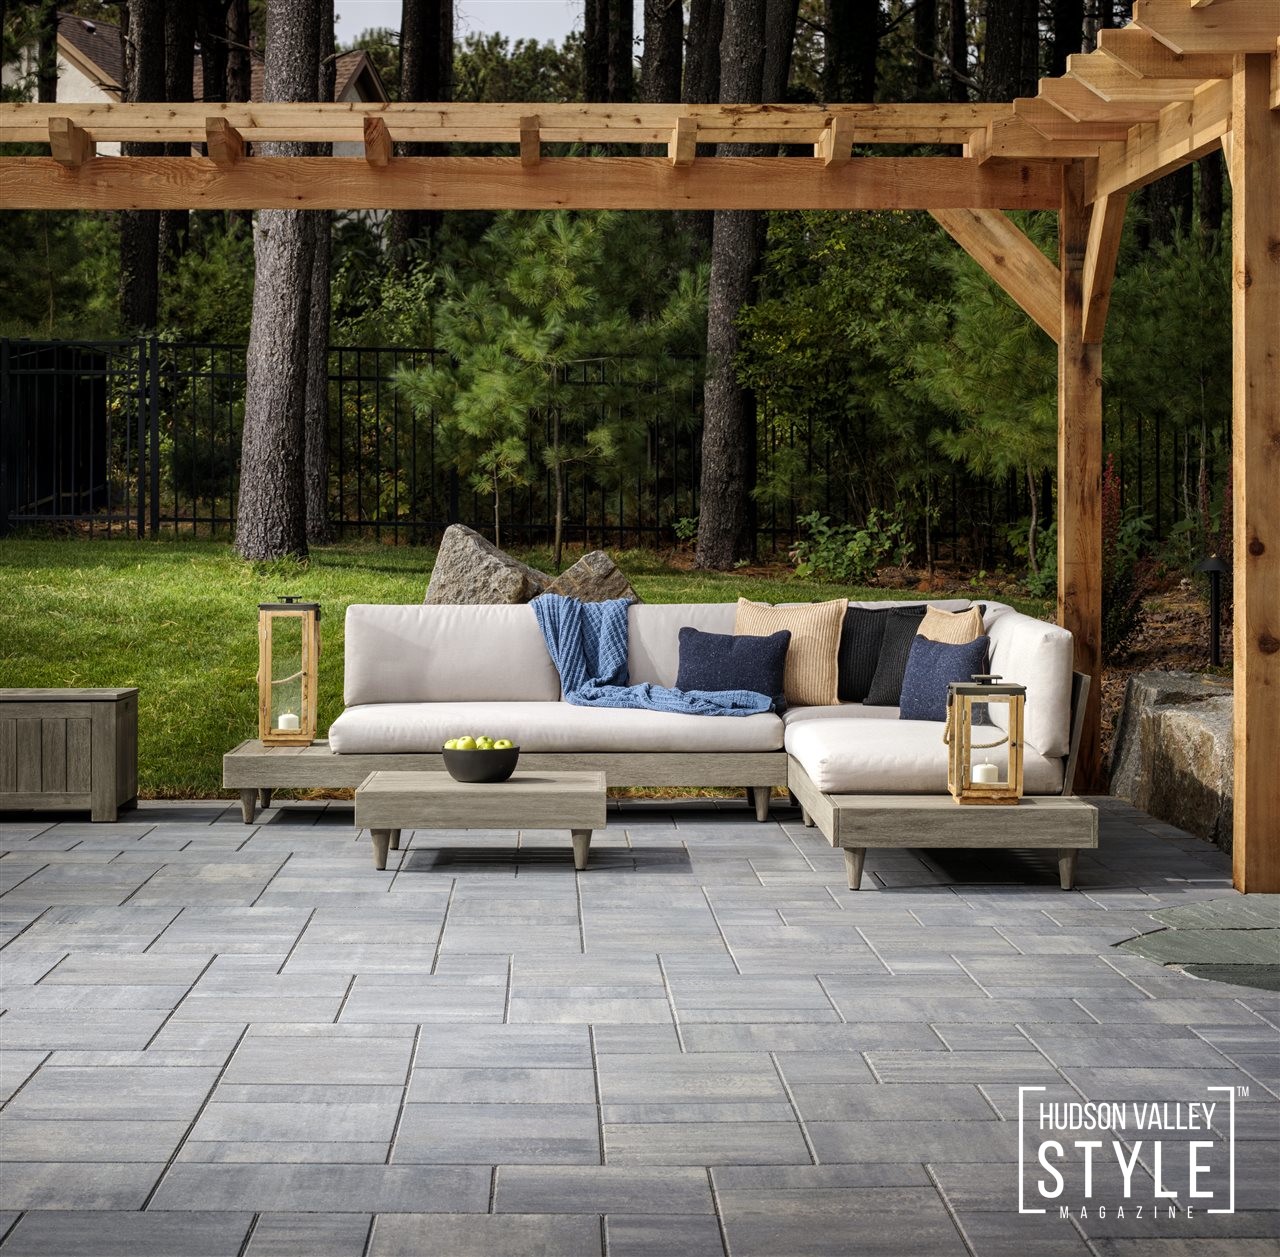 4 Options for an ideal Outdoor Space: Pick the one that's right for You